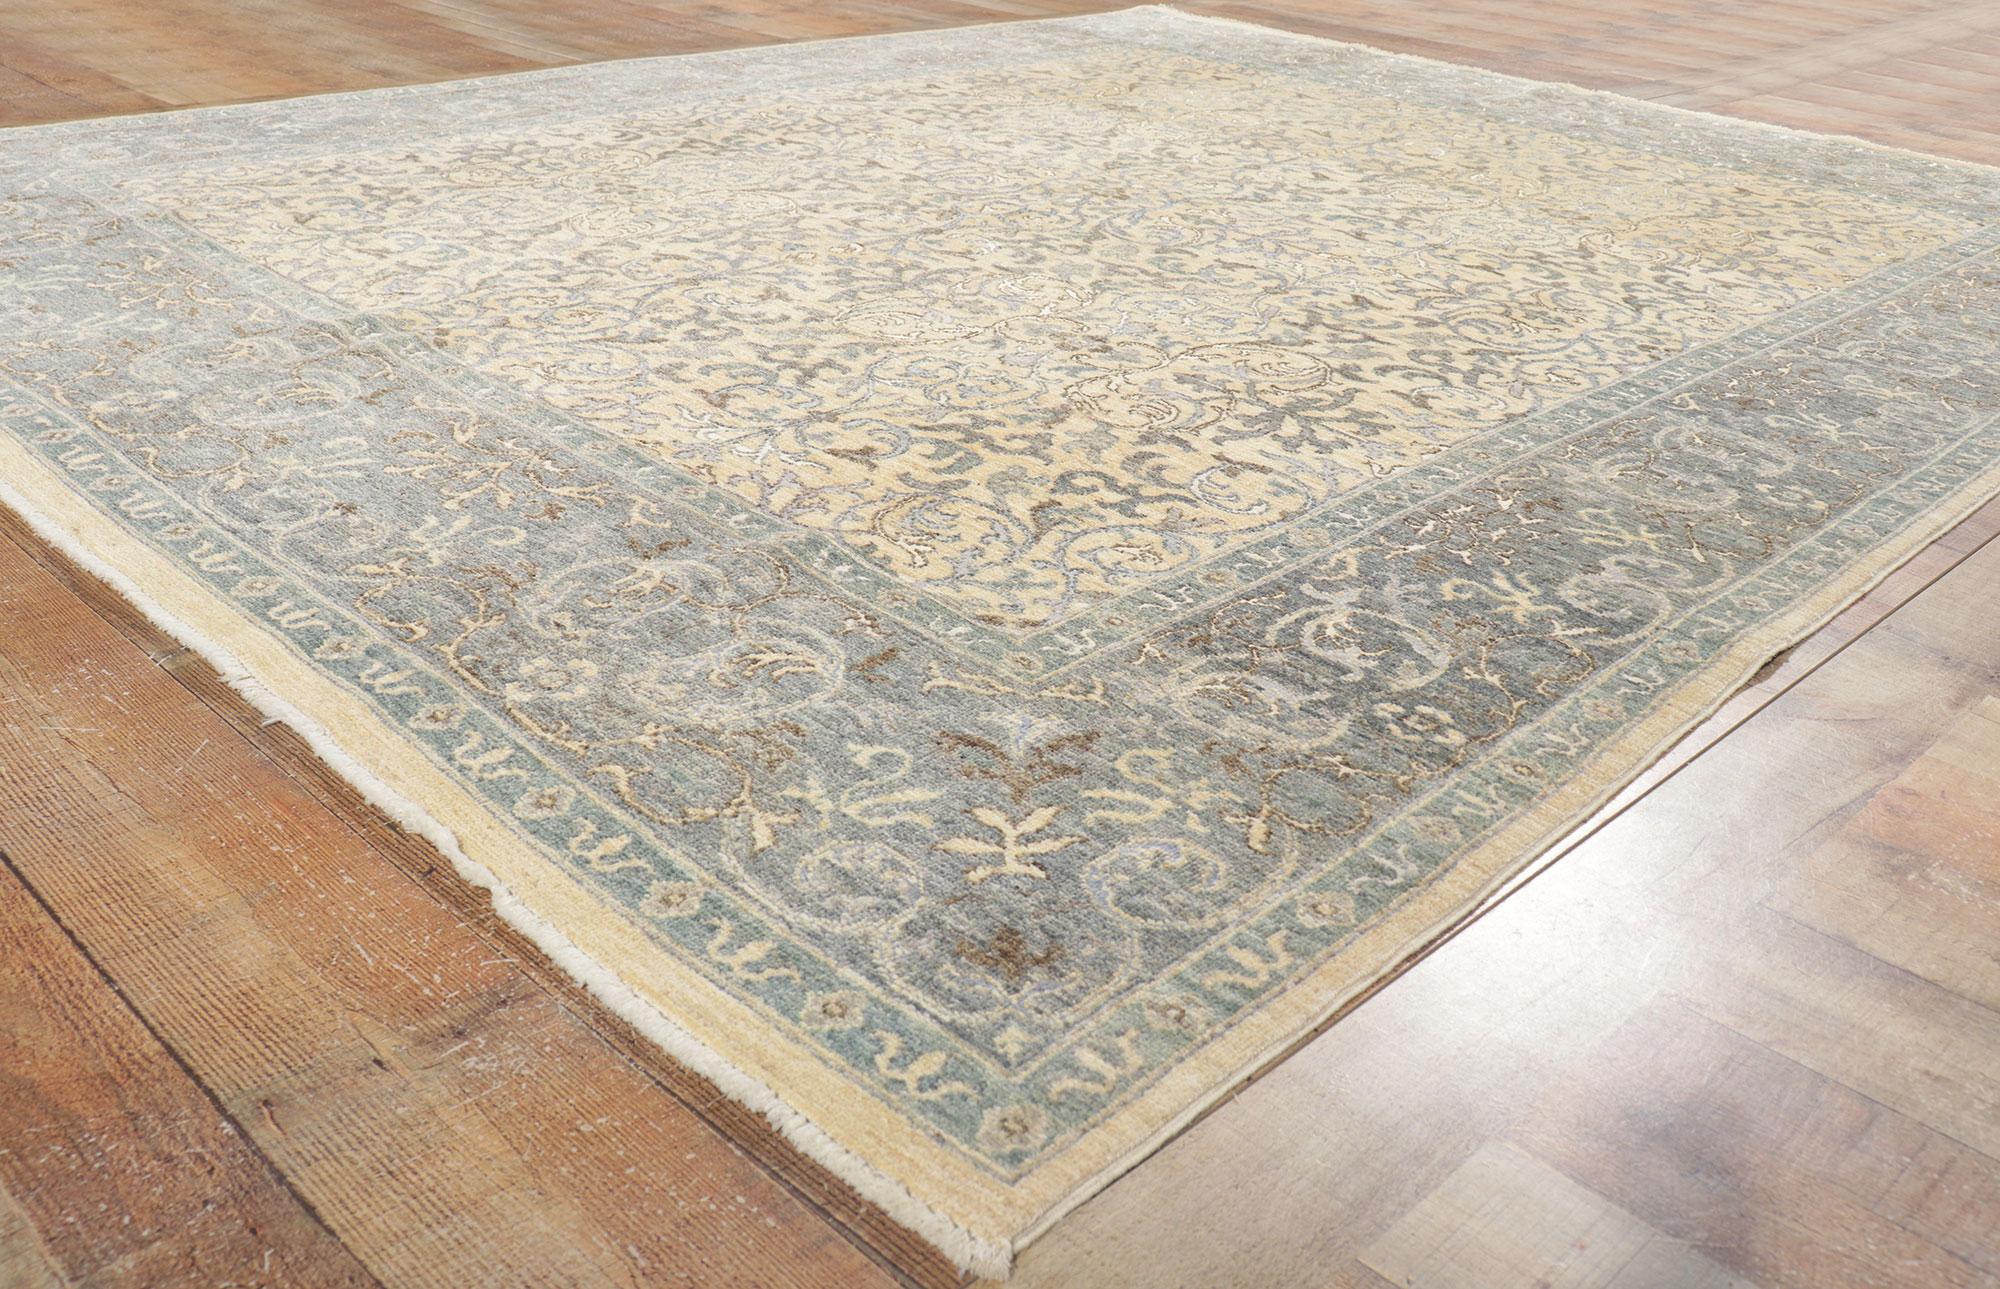 Contemporary New Transitional Damask Scroll Rug with Soft Earth-Tone Colors For Sale